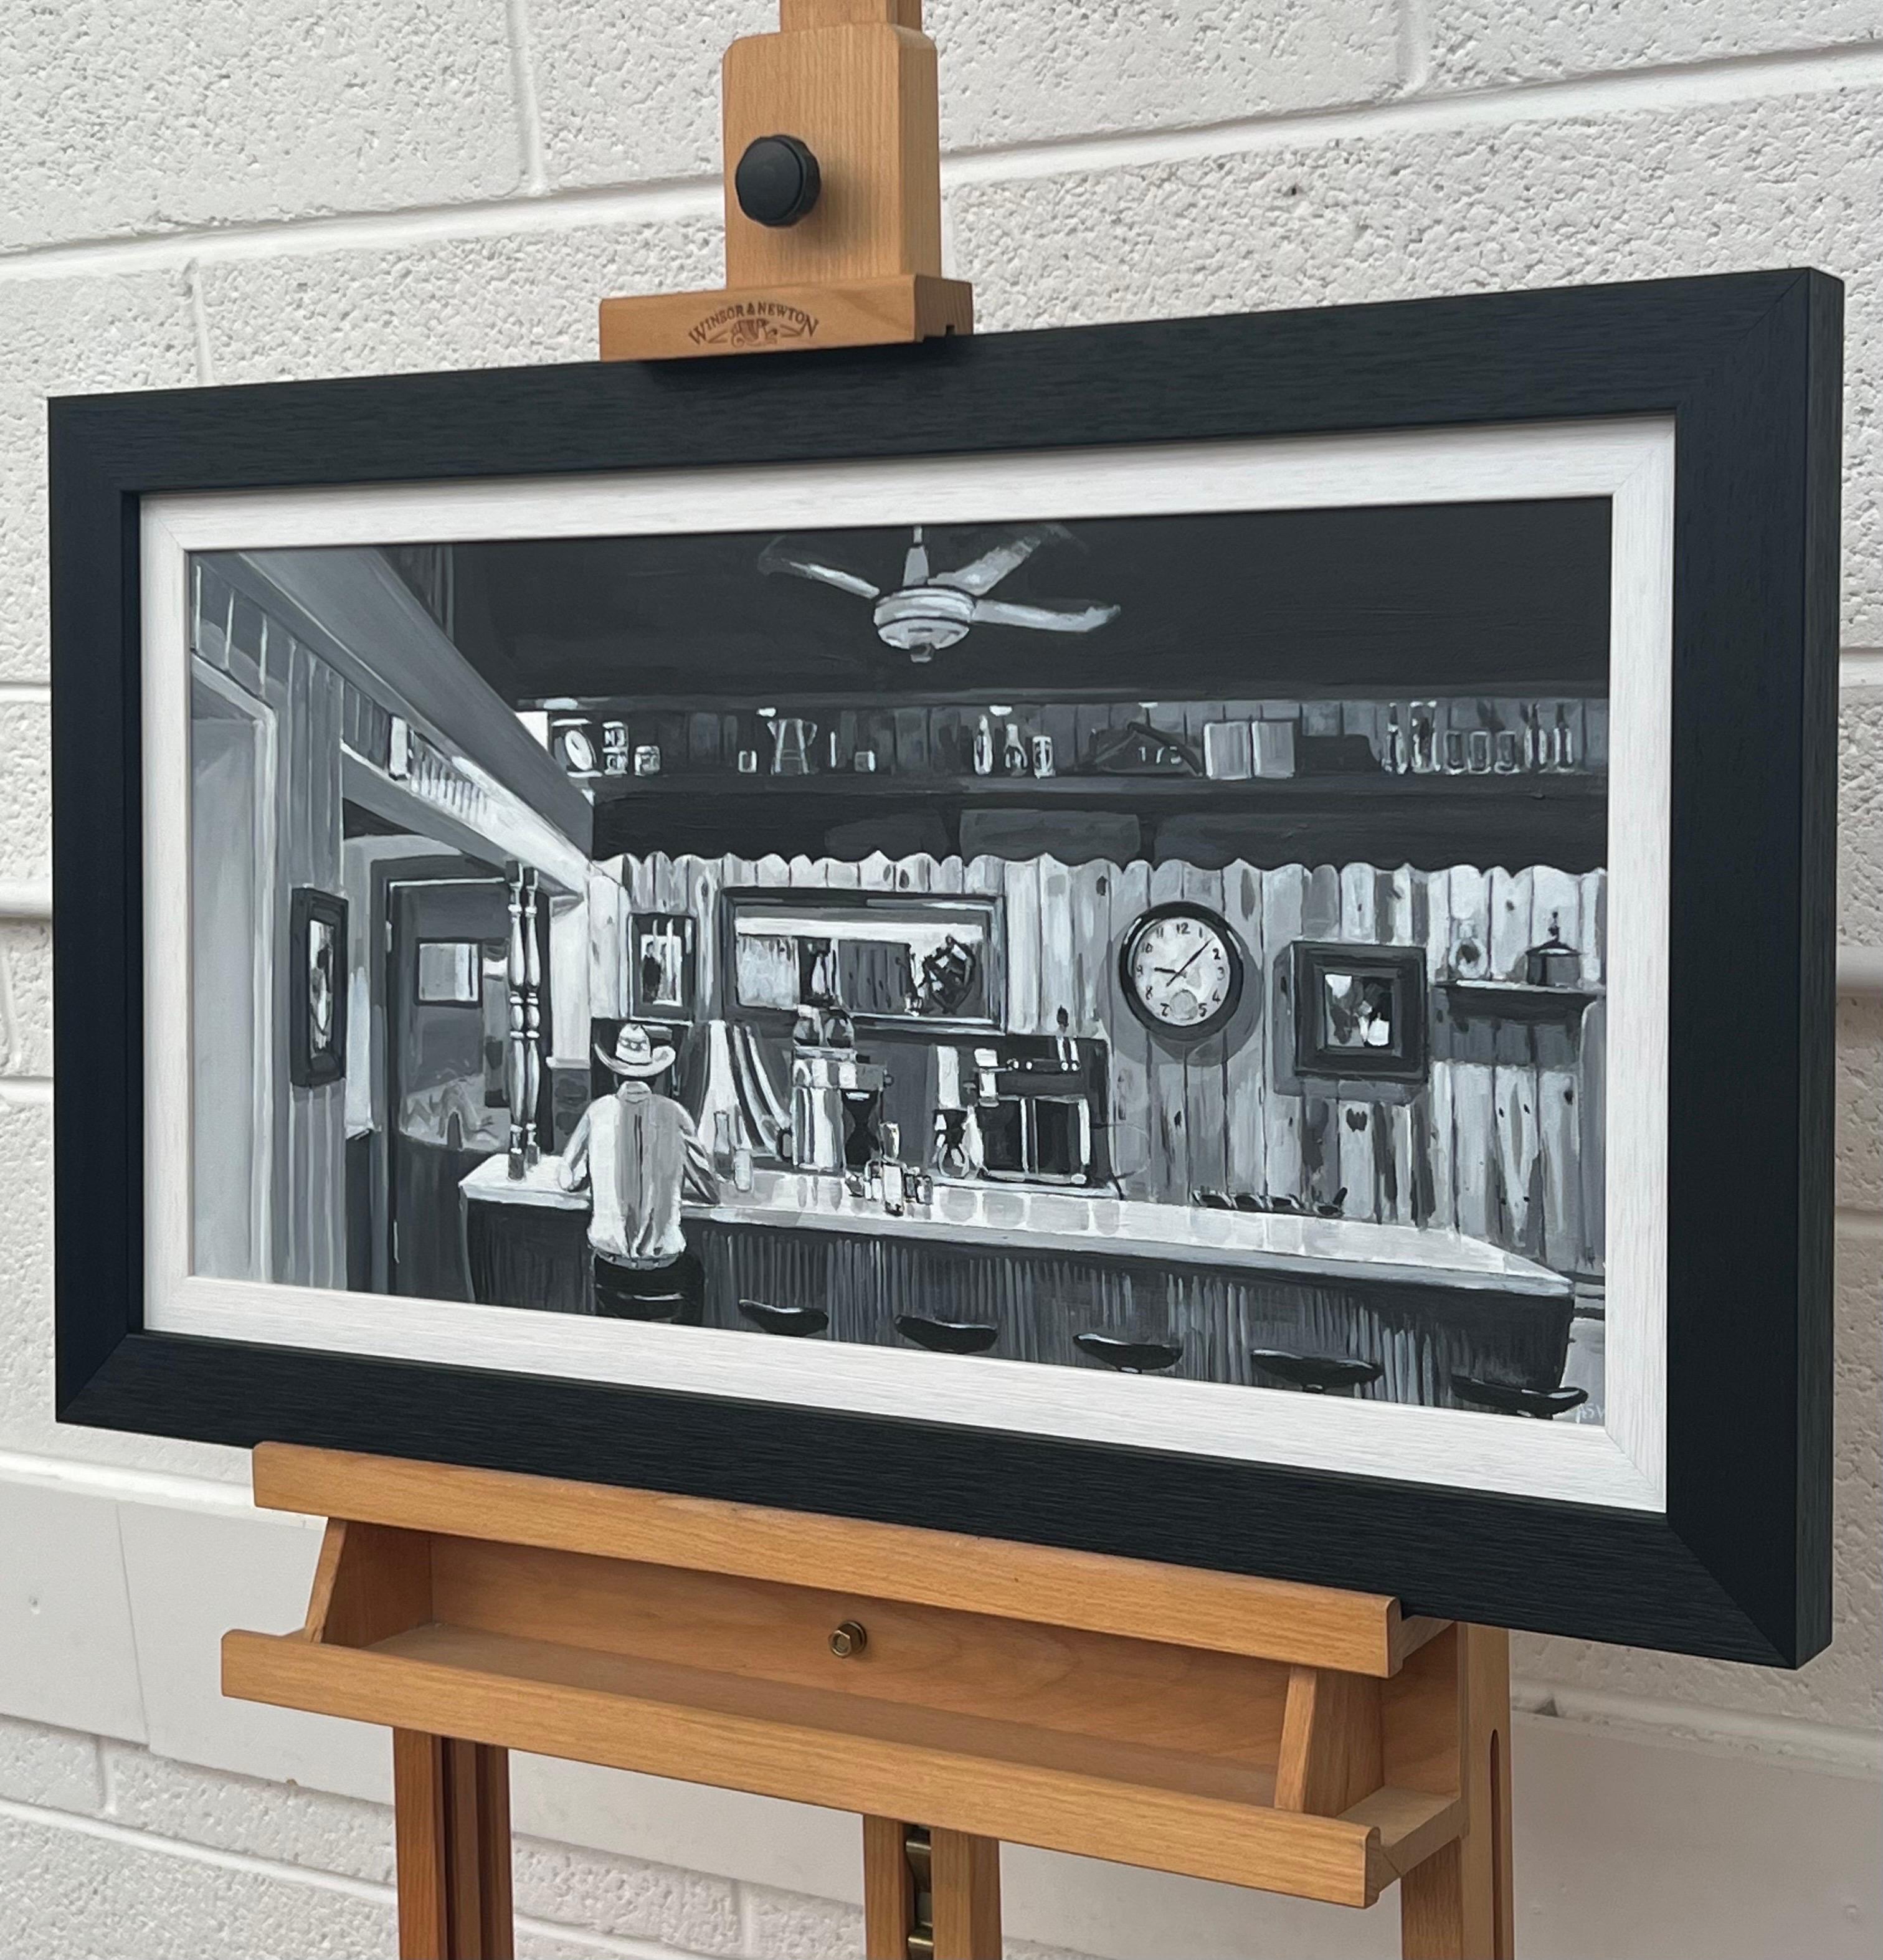 American Cowboy Diner Painting by British Contemporary Artist in Black & White 2